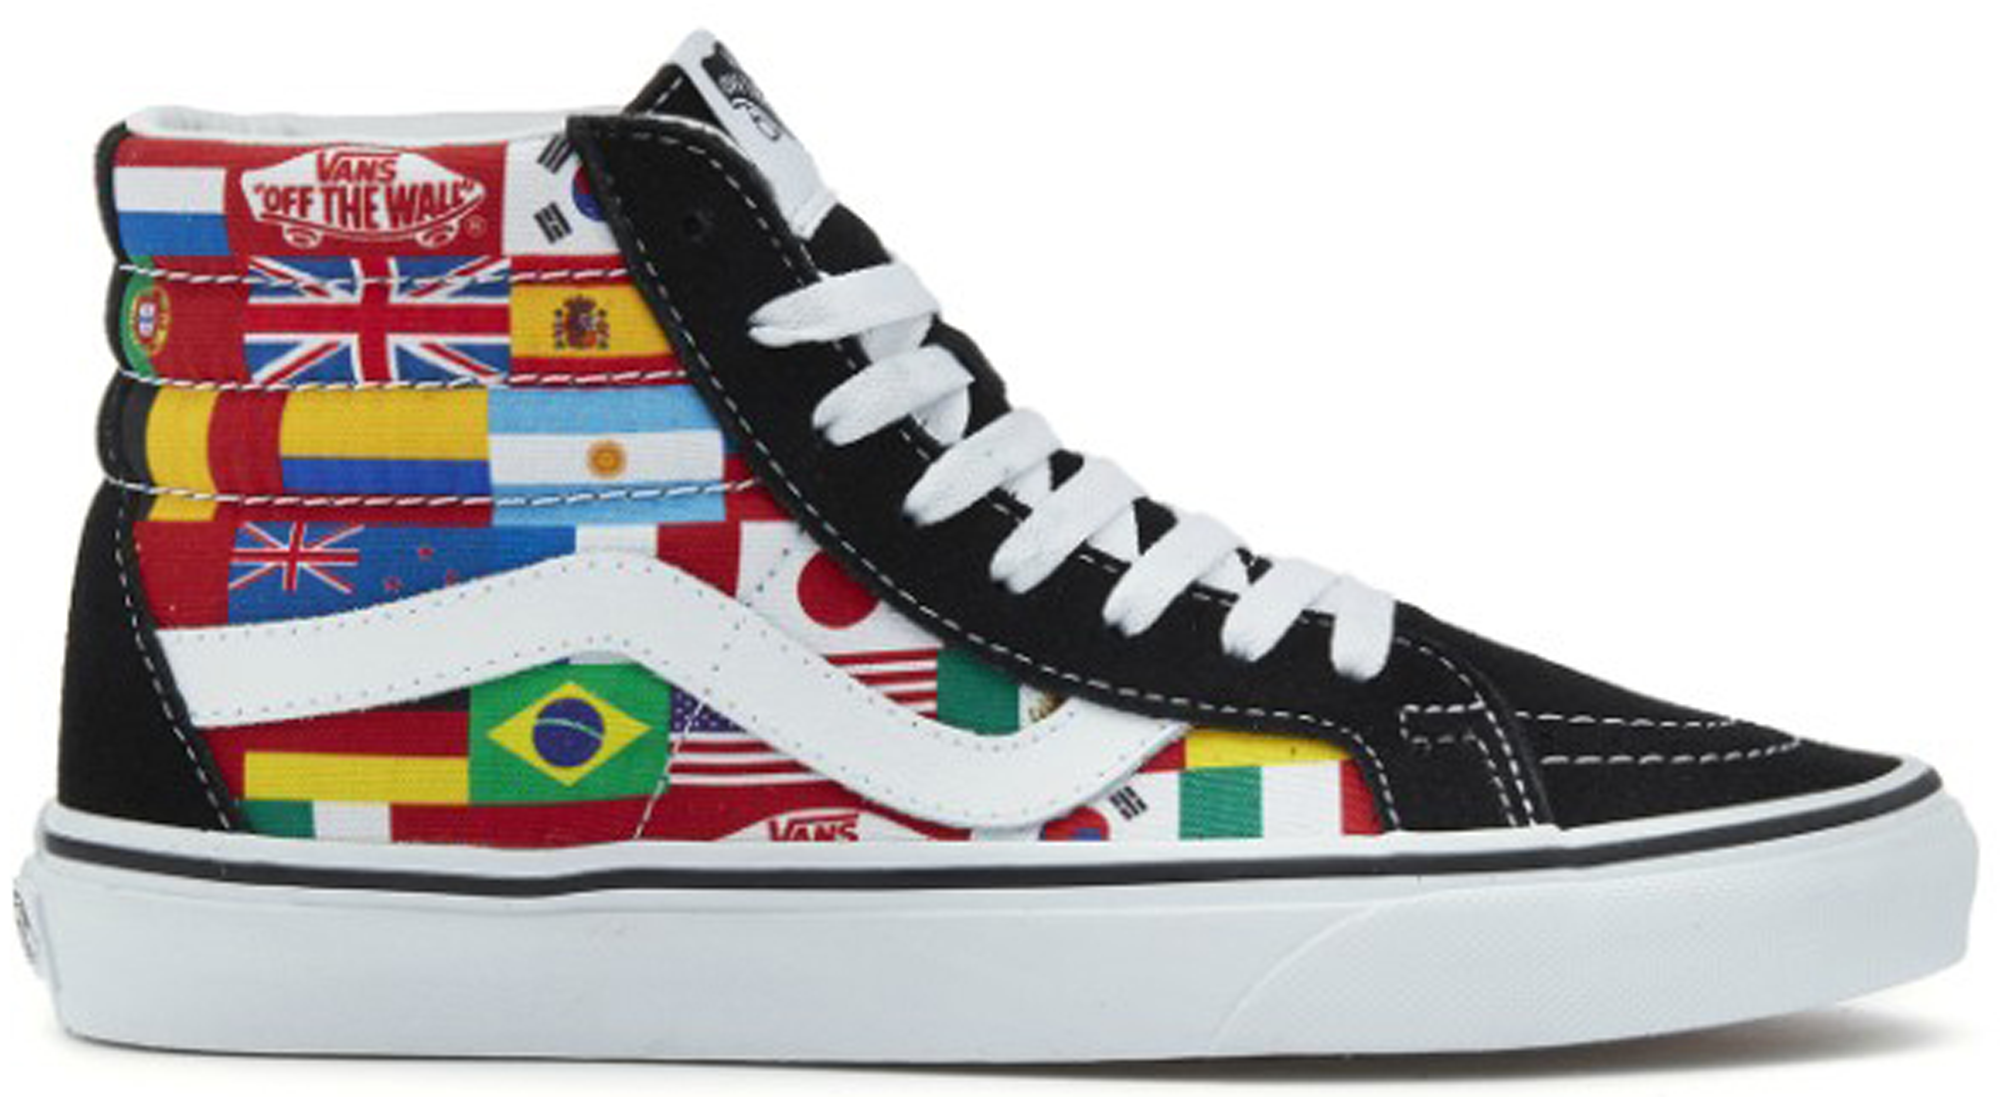 vans with flags on them